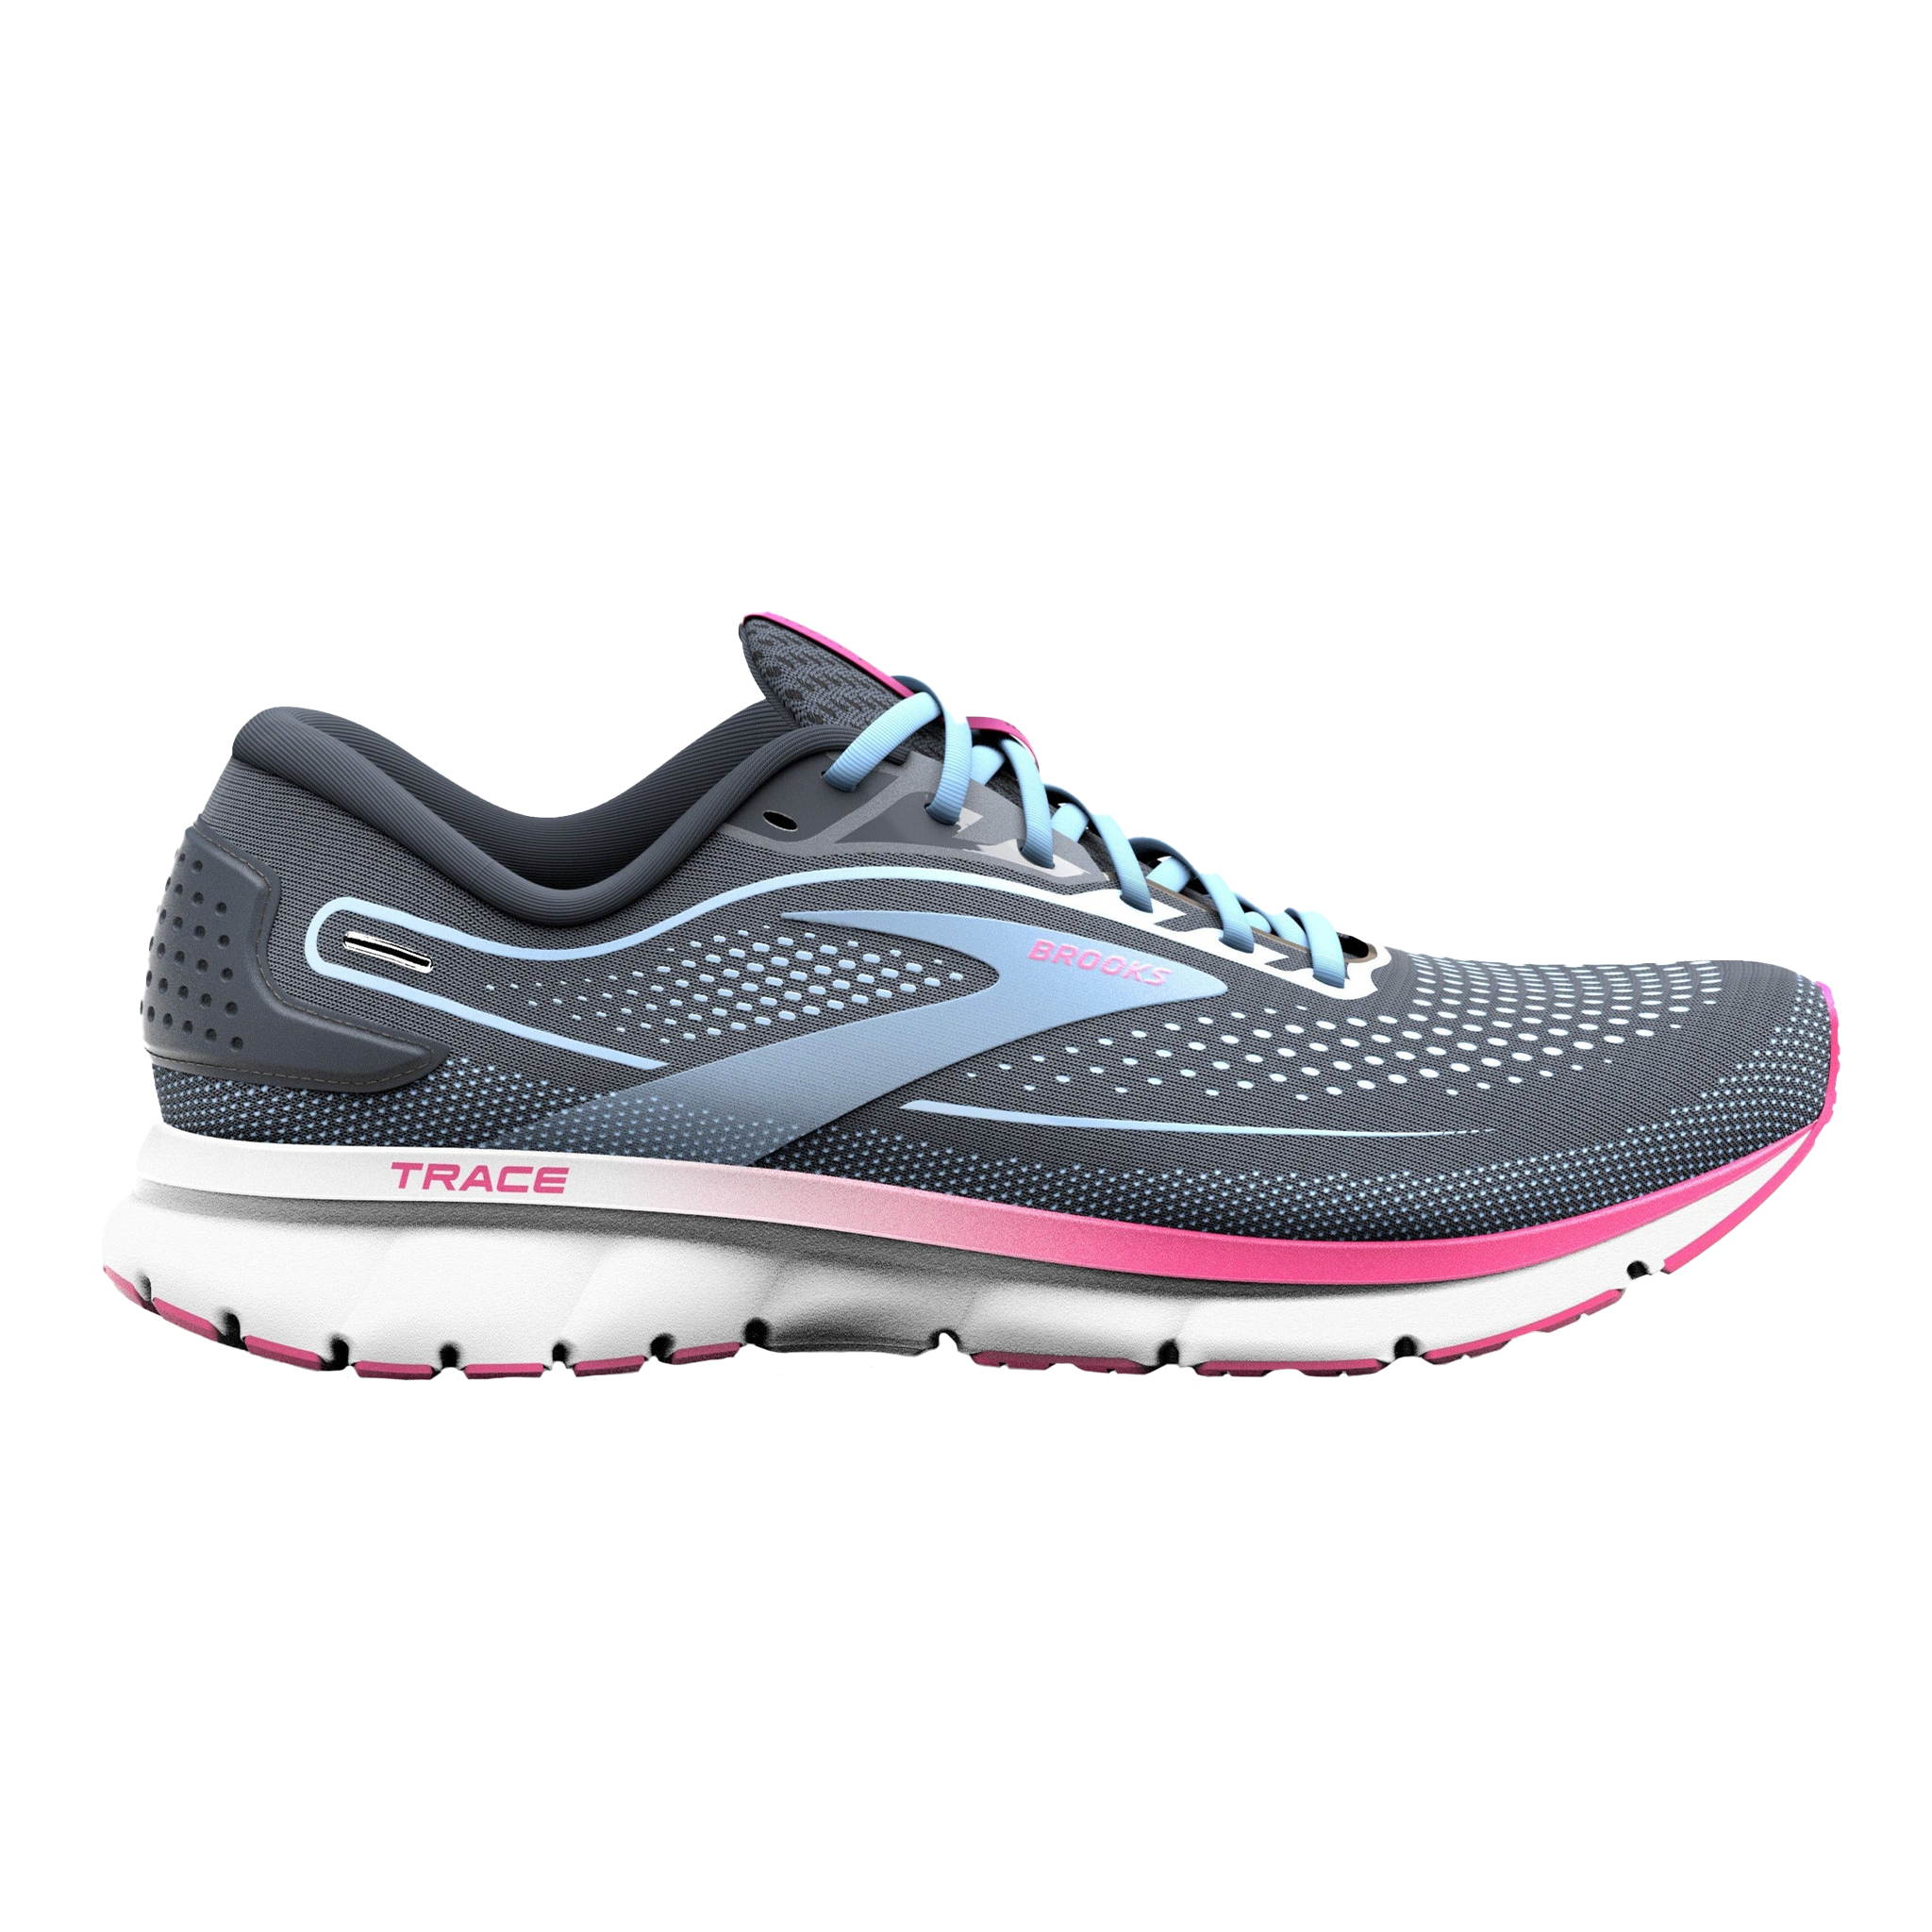 Brooks Womens Trace 2 - Ebony/Open Air/Lilac Rose - Neutral